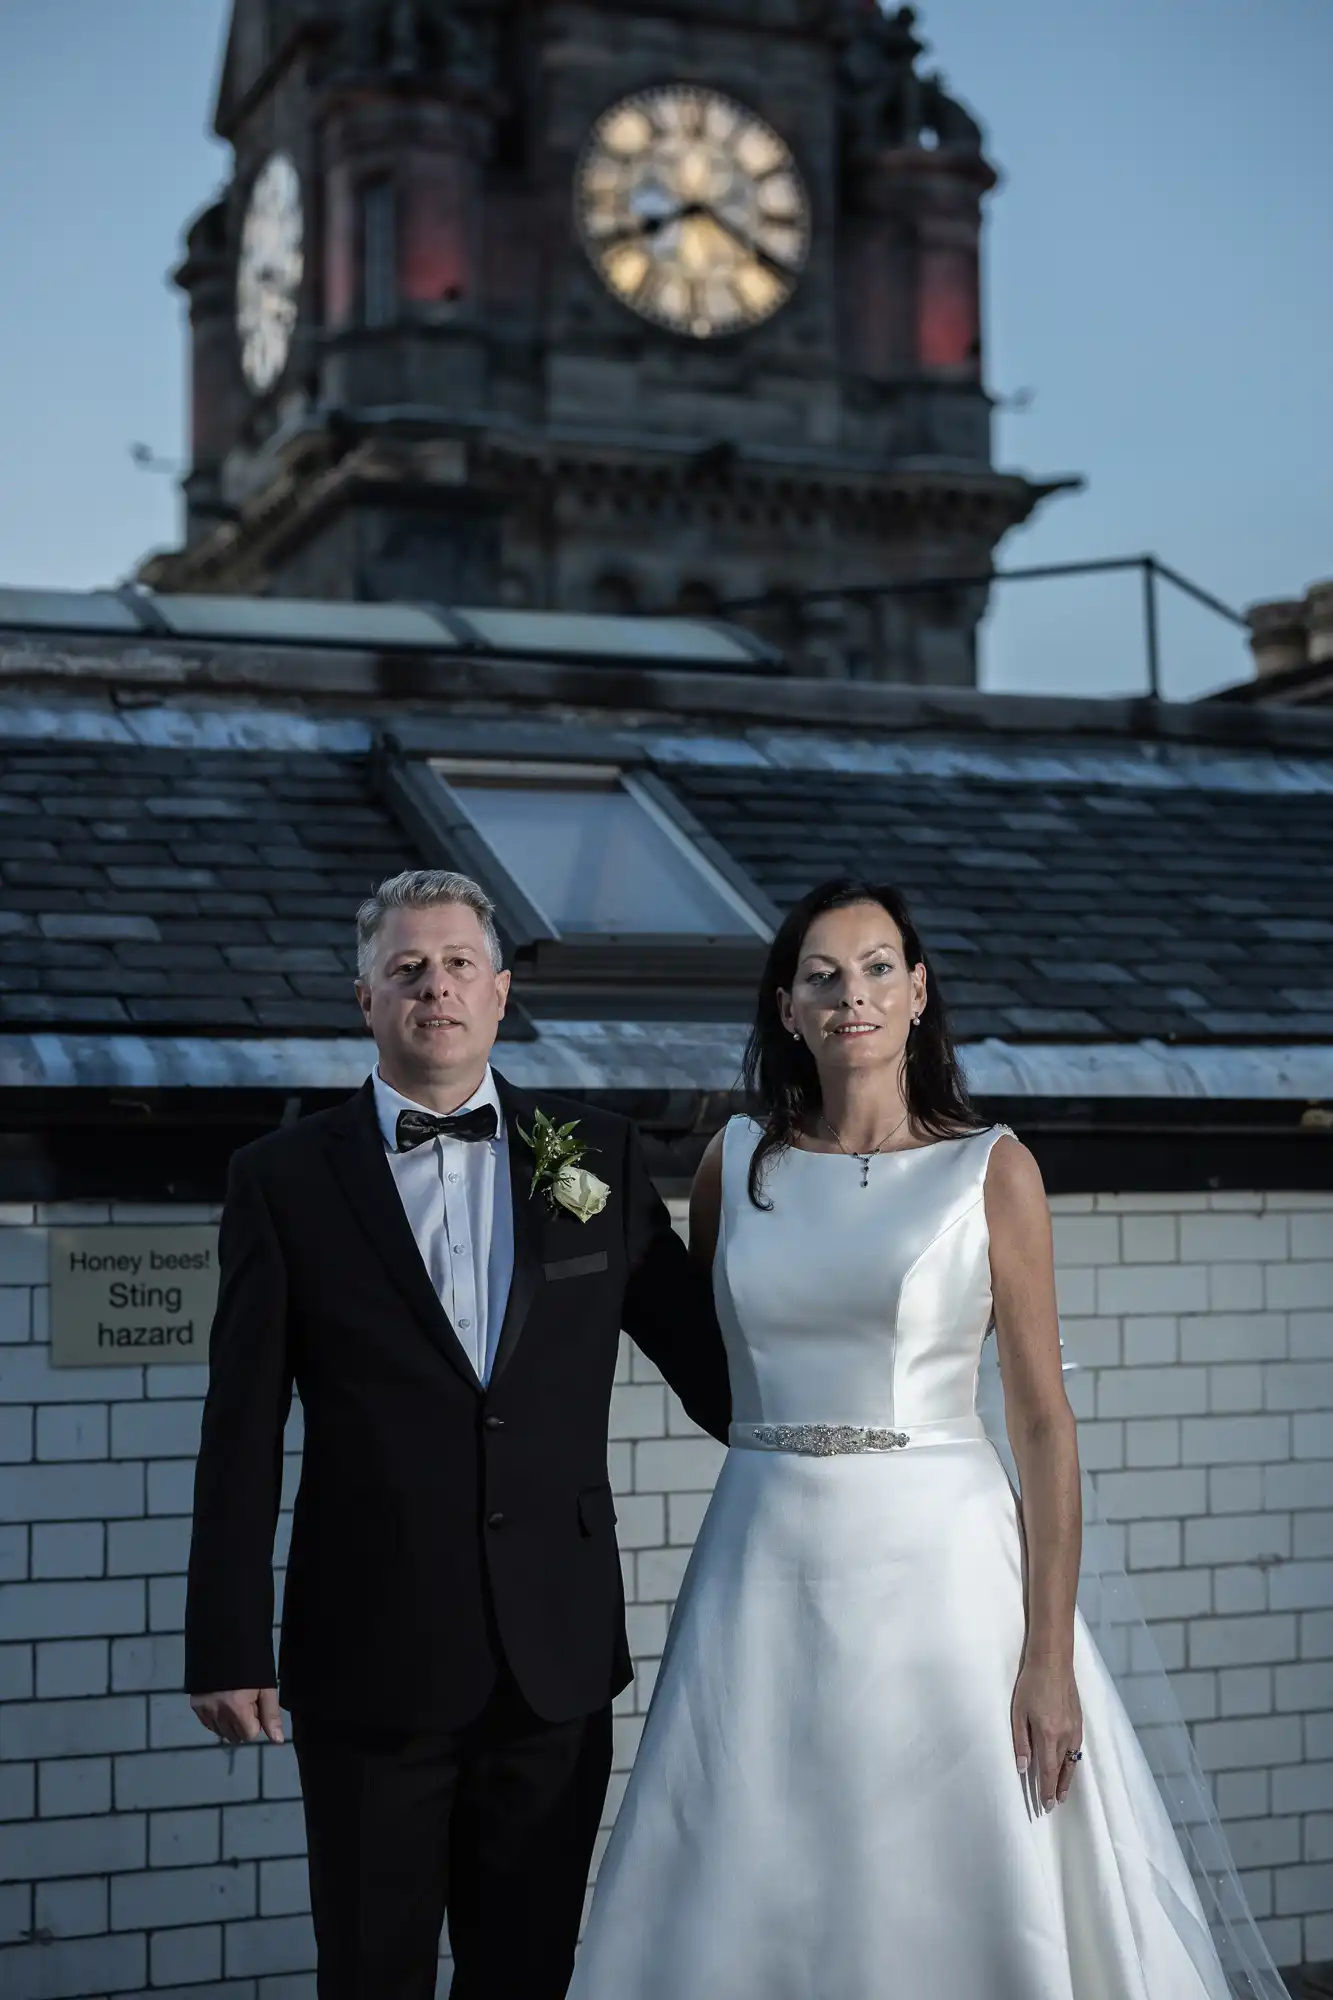 A bride and groom stand in formal wedding attire before a large clock tower under a clear sky.